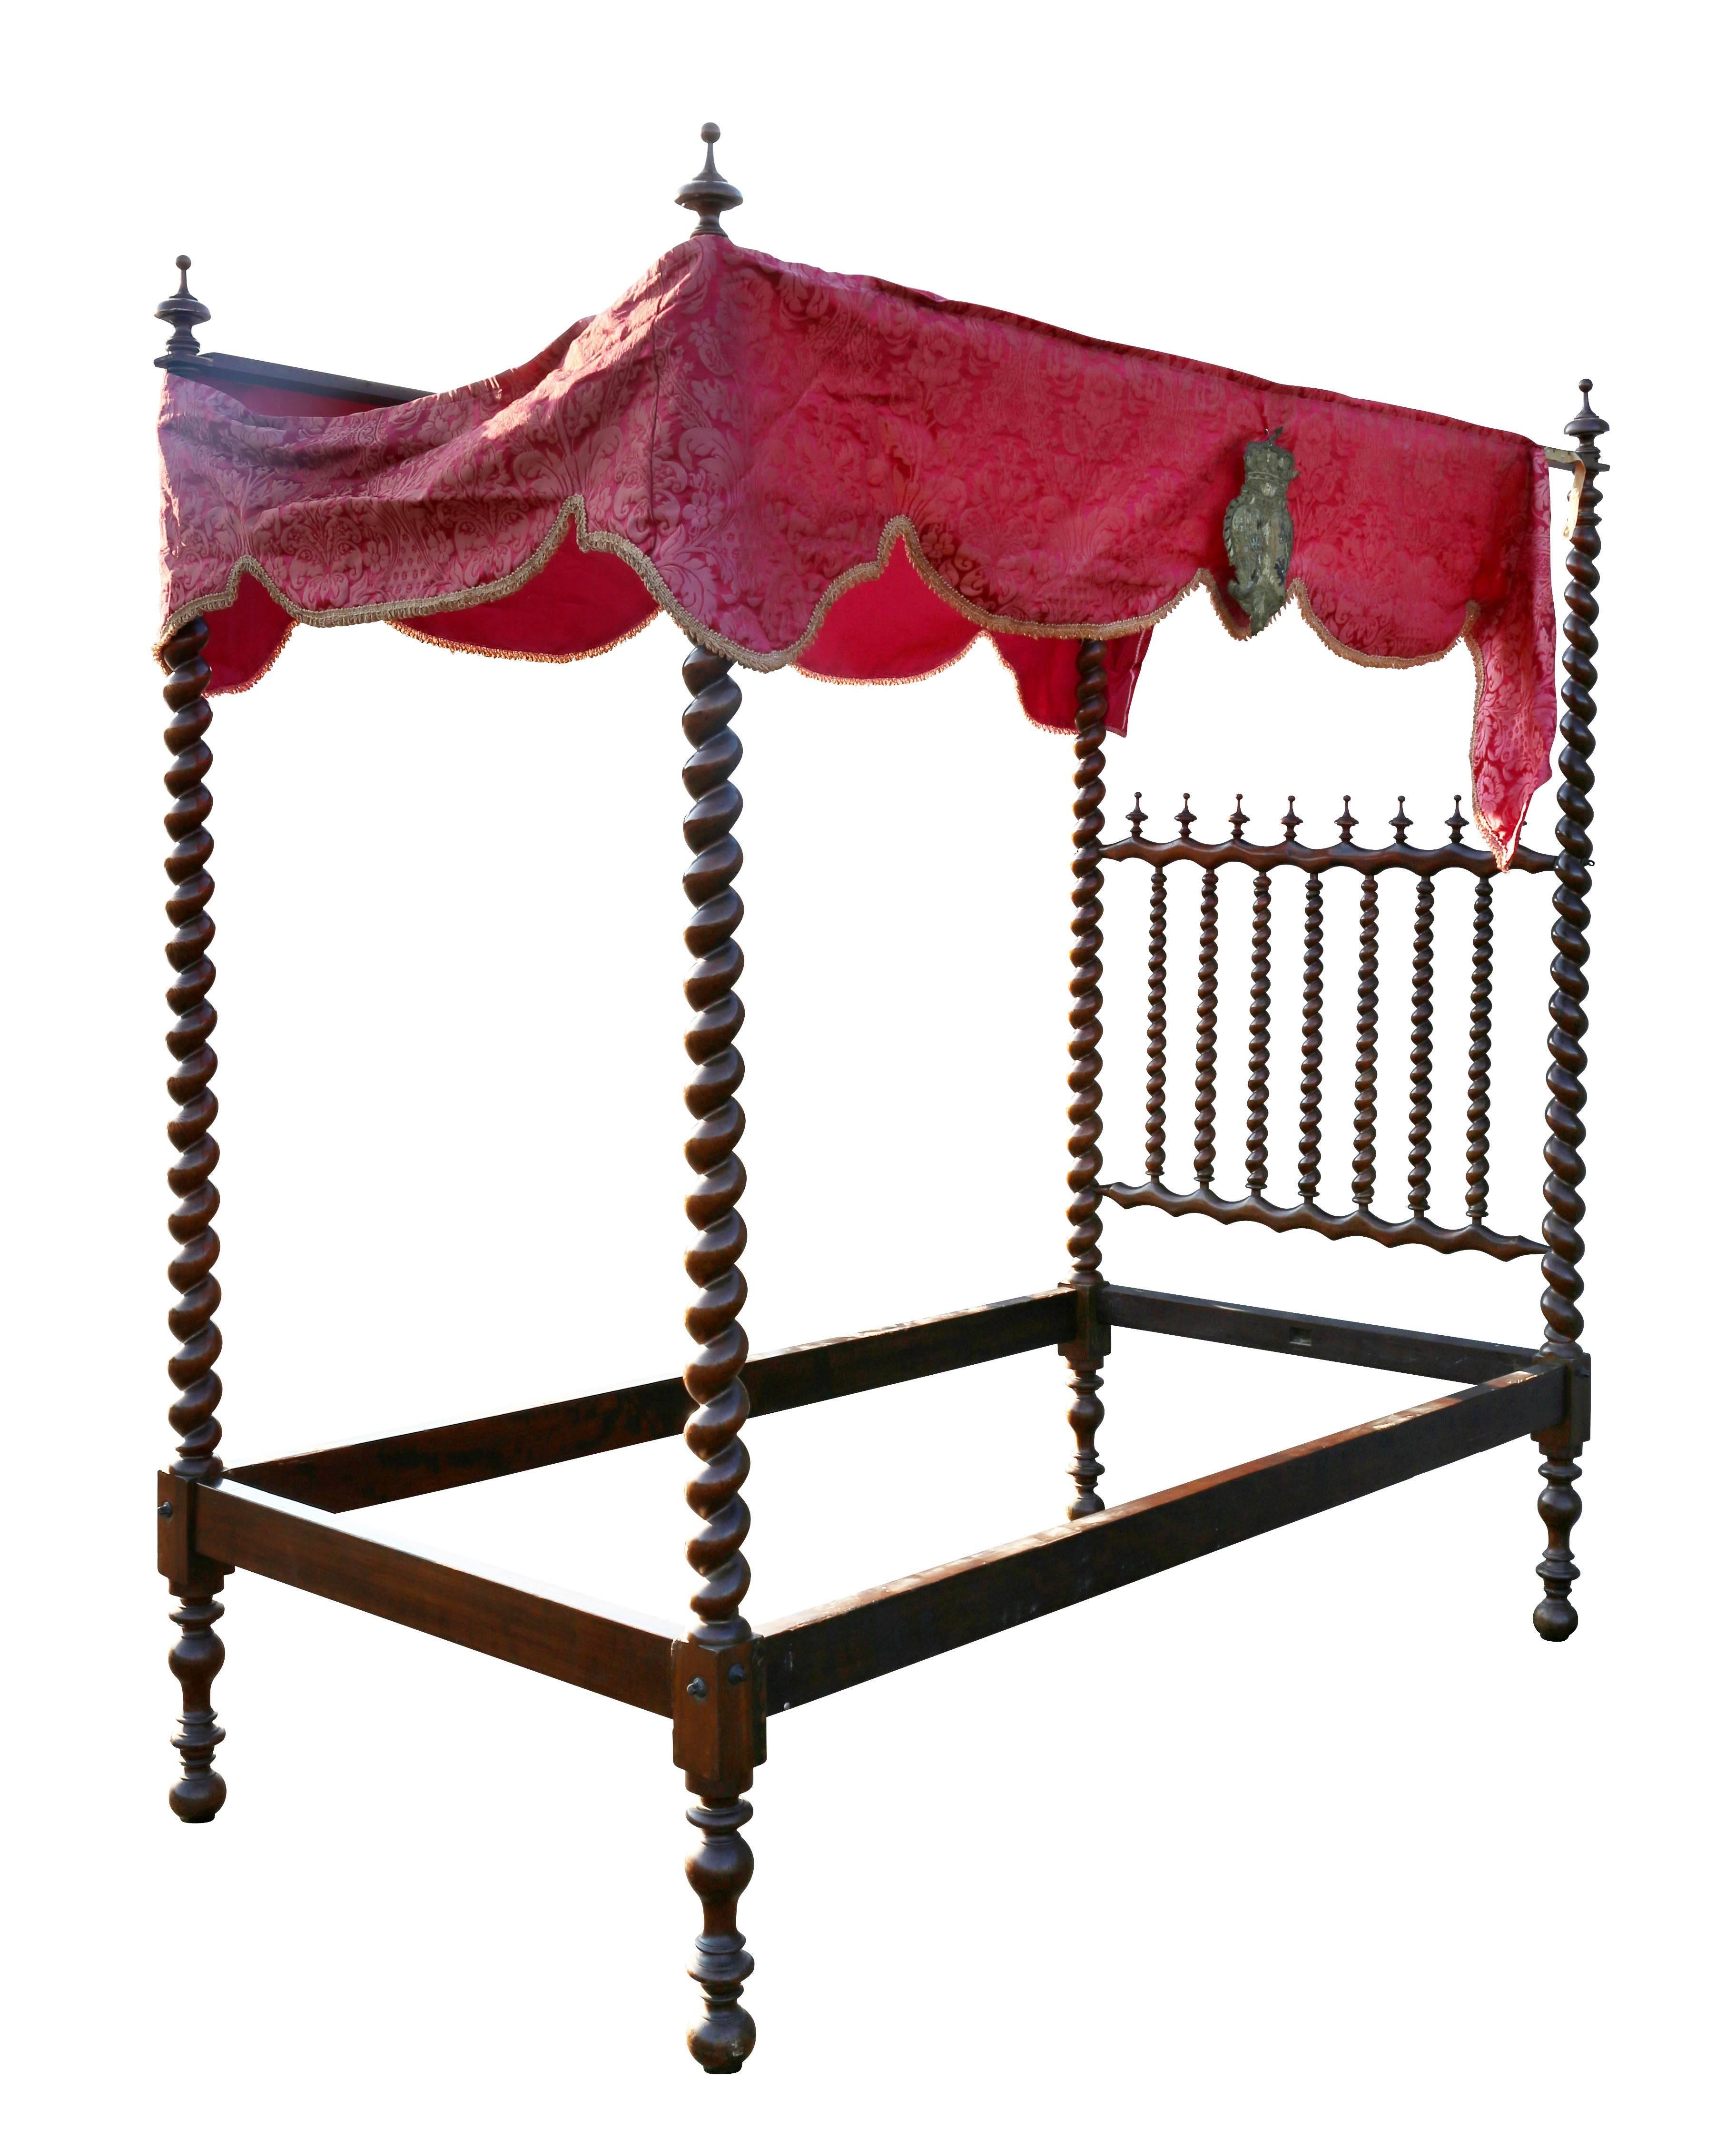 With barley twist supports and conforming headboard, with trim with metallic thread crests.